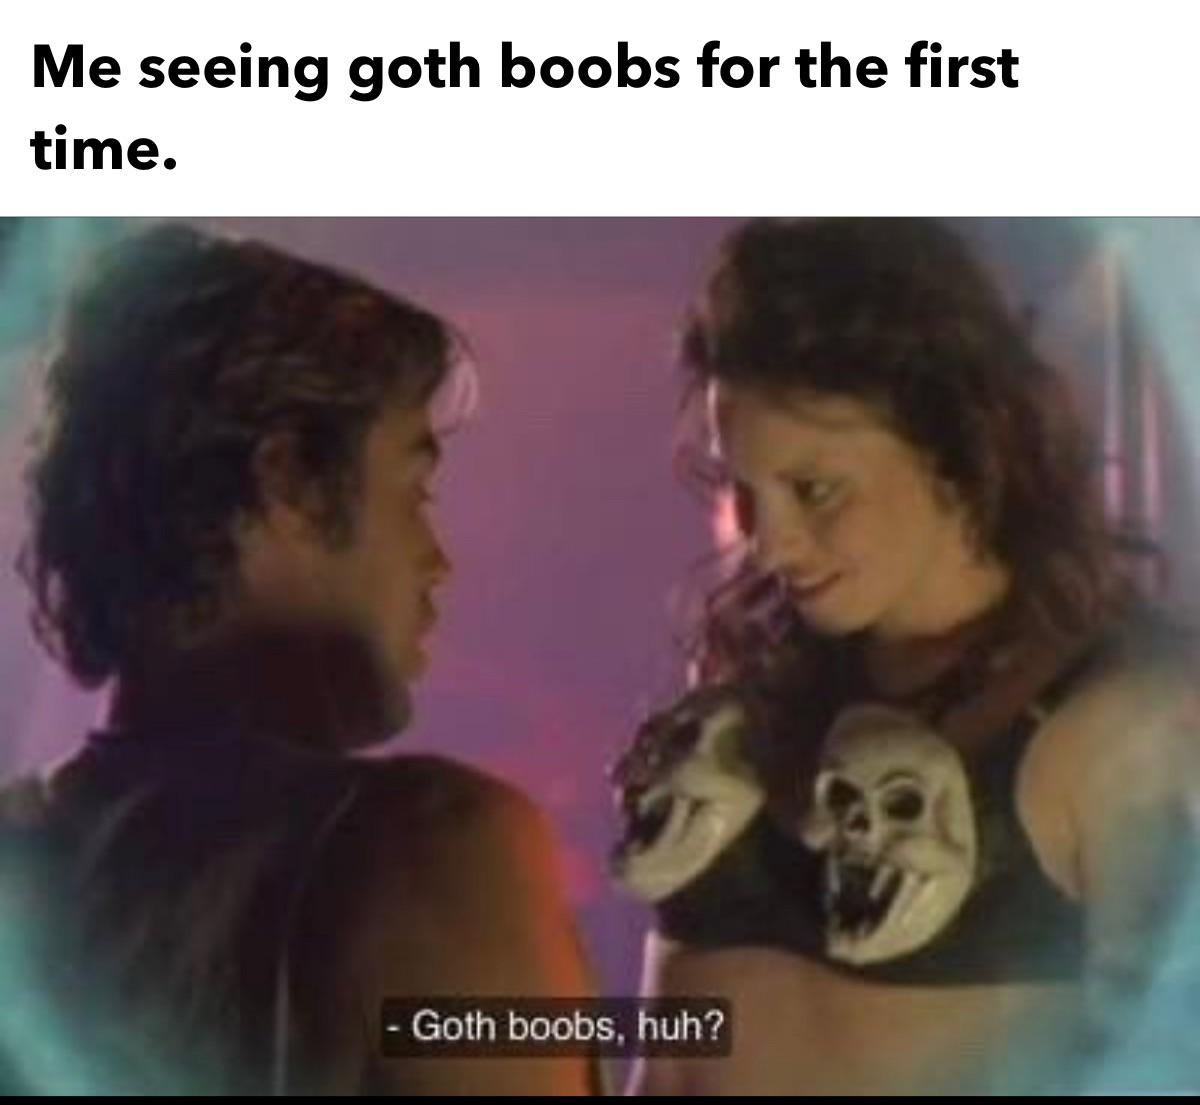 monday morning randomness - goth voobs - Me seeing goth boobs for the first time. Goth boobs, huh?